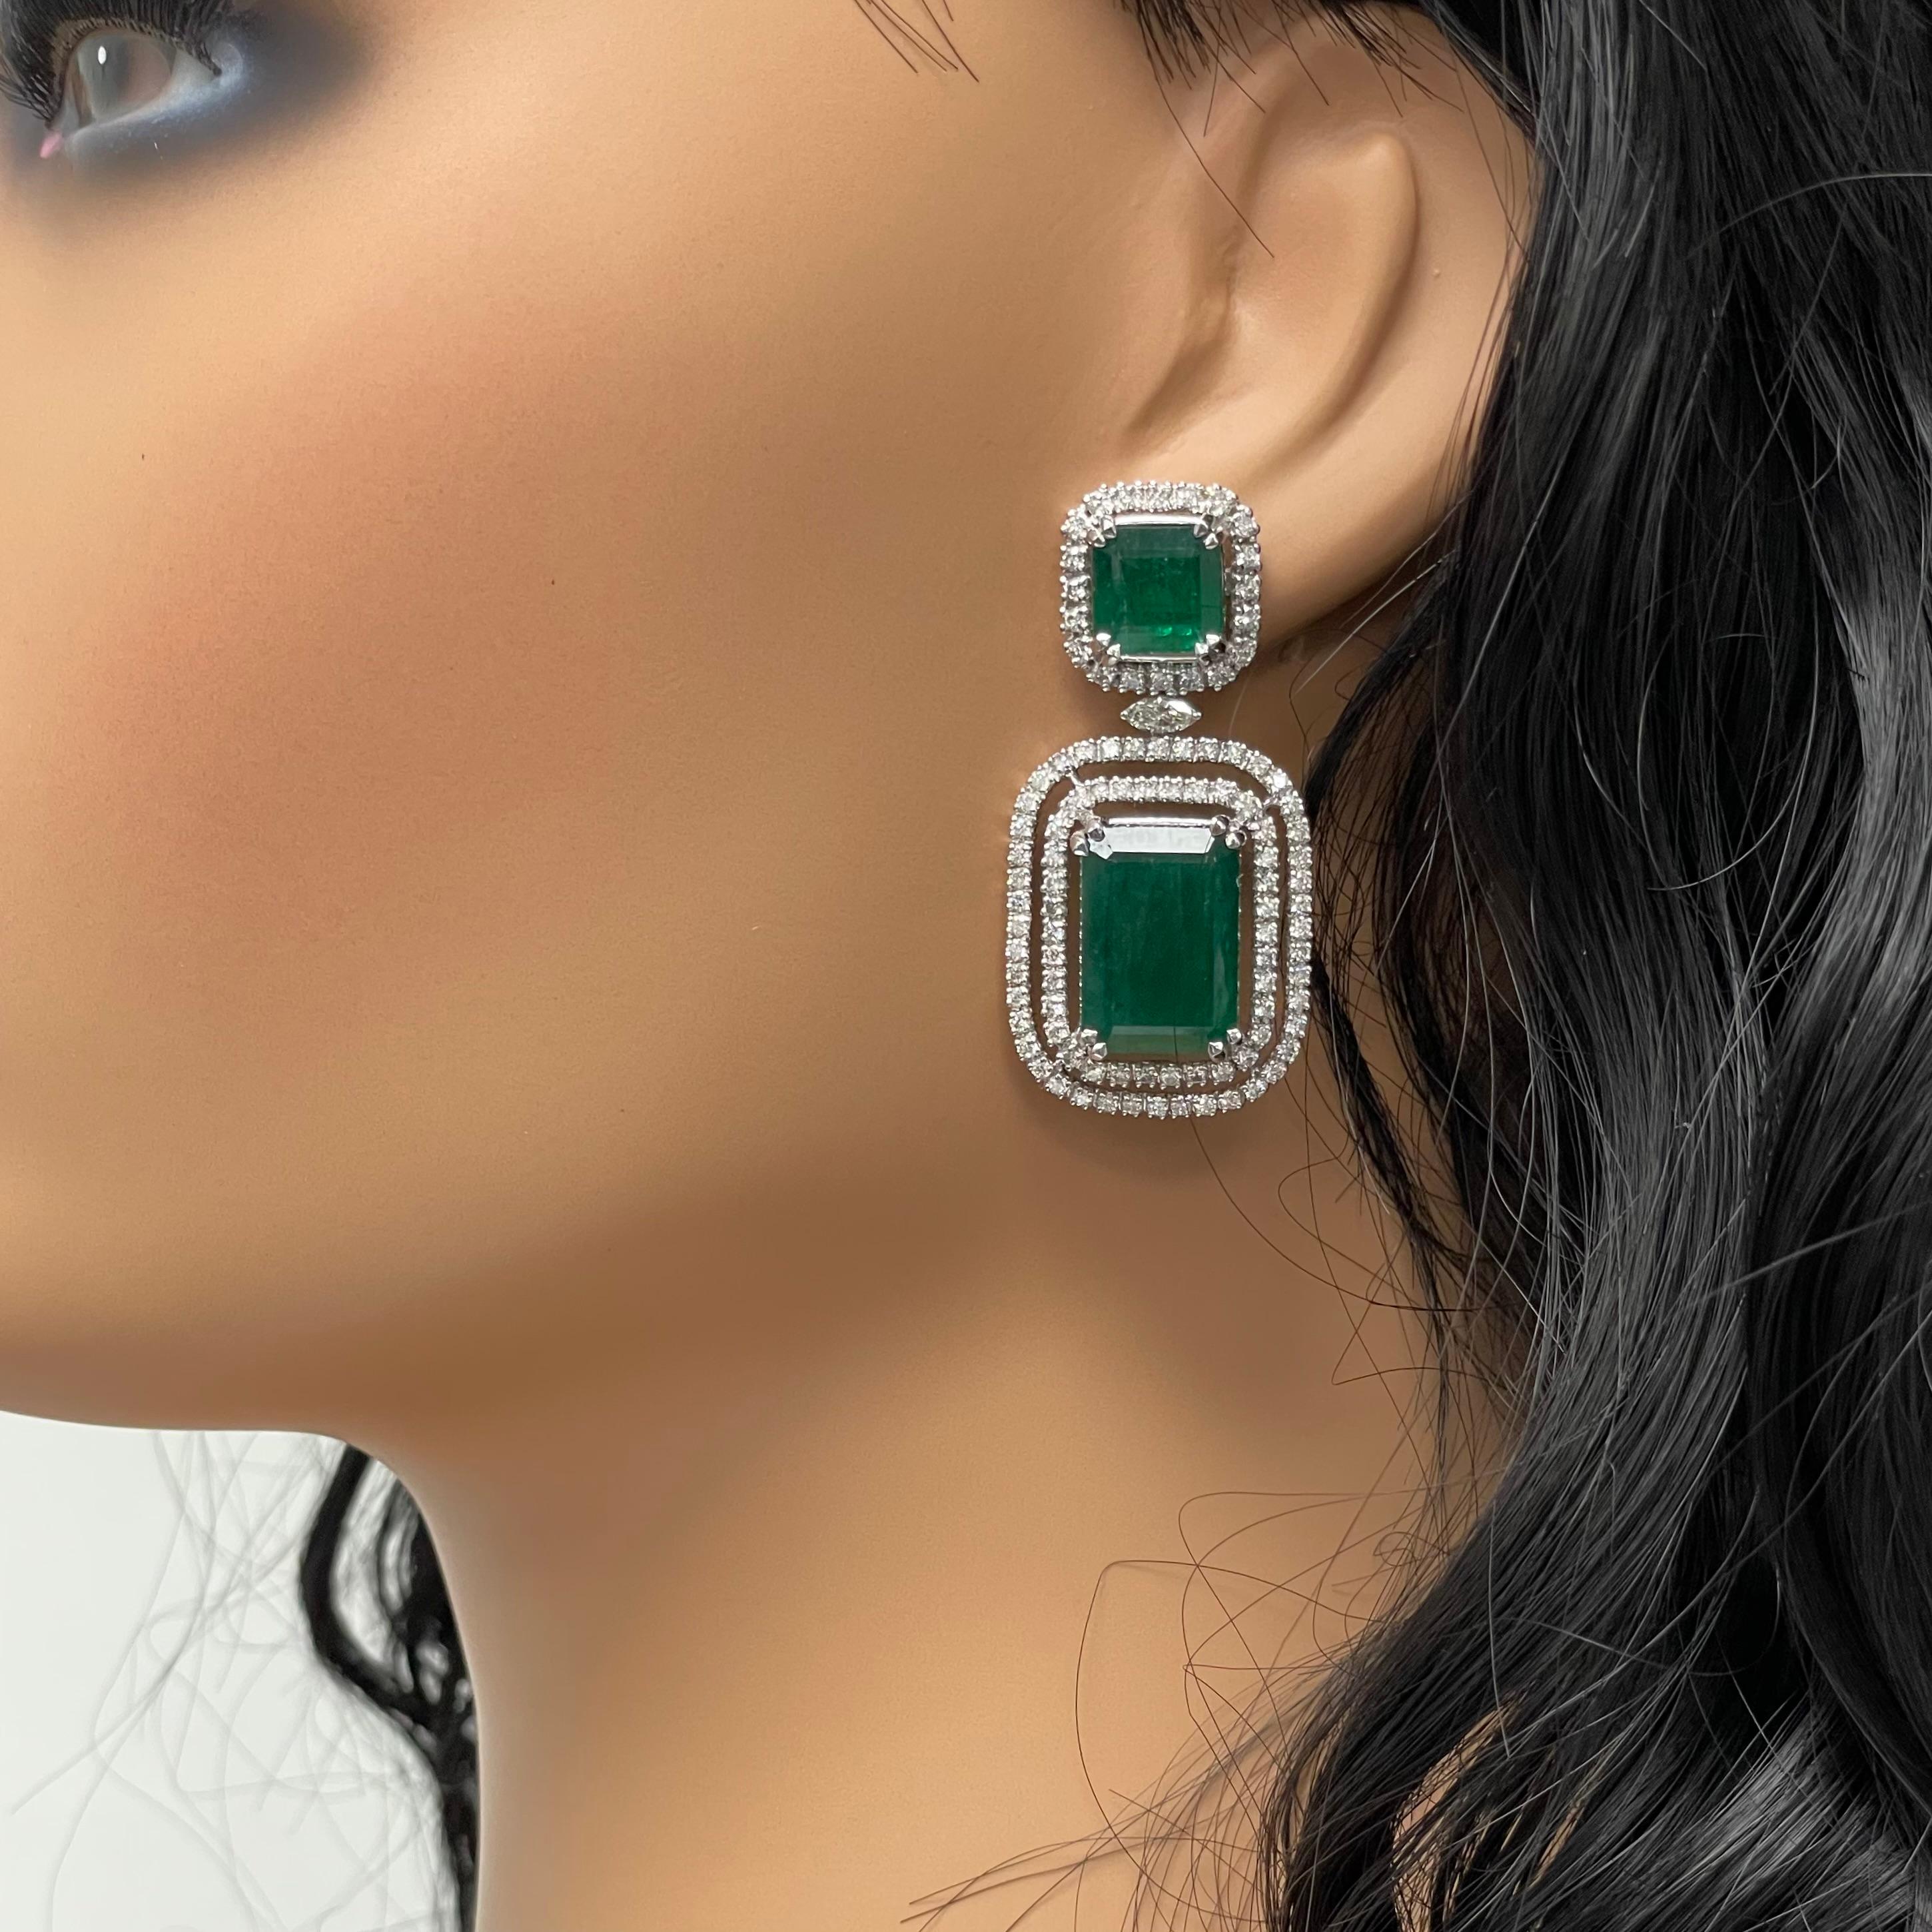 The Renee Emerald & Diamond Earrings are a unique and luxurious heritage pair with royal green emeralds and diamonds set in white gold. 

Gemstones Type: Emerald
Gemstones Shape: Rectangular
Gemstones Weight: 25.01 ct
Gemstones Color: